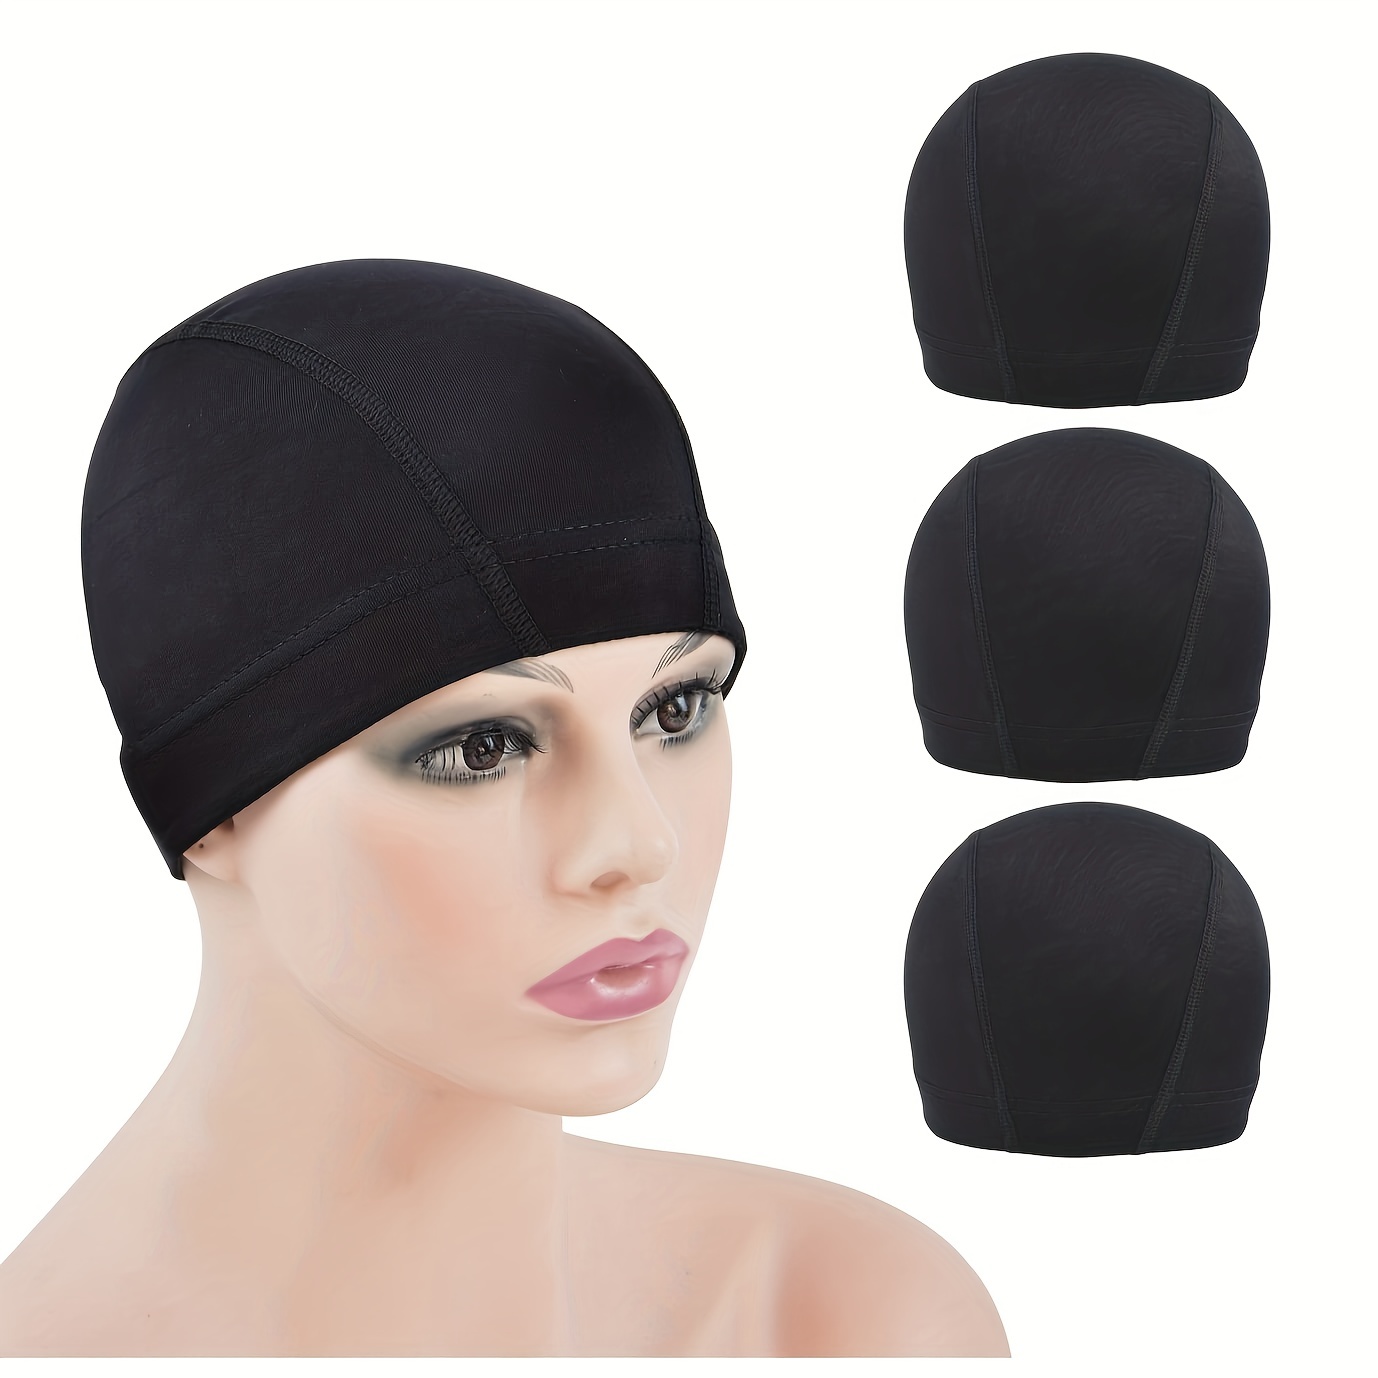 5pcs Spandex Mesh Dome Wig Cap For Making wig, Stretchable hair net And  Elastic Dome Mesh Cap with small holes Dome caps for men women Black(5pcs S)